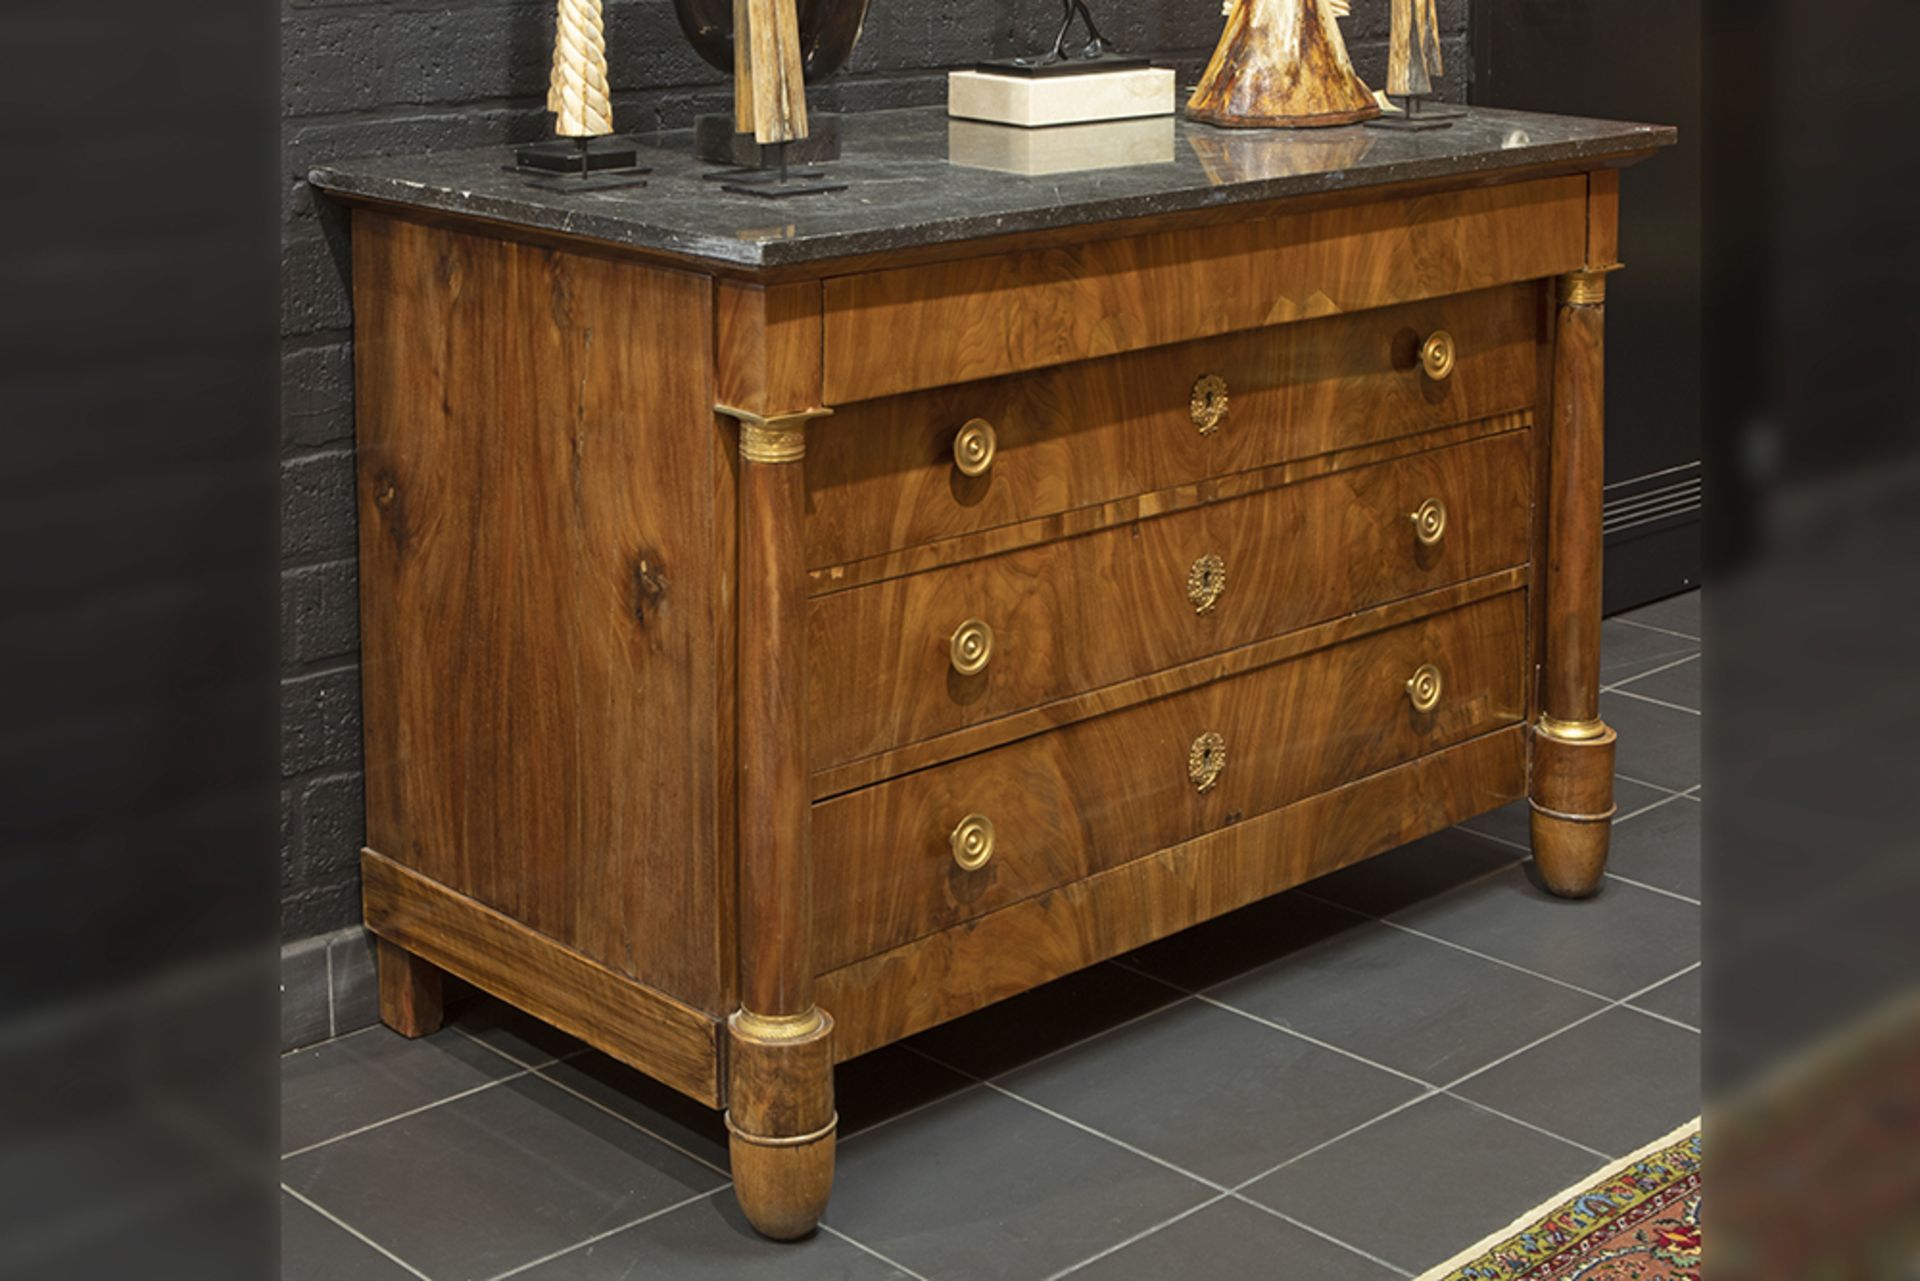 early 19th Cent. French Empire period chest of drawers in mahogany with mountings in gilded bronze